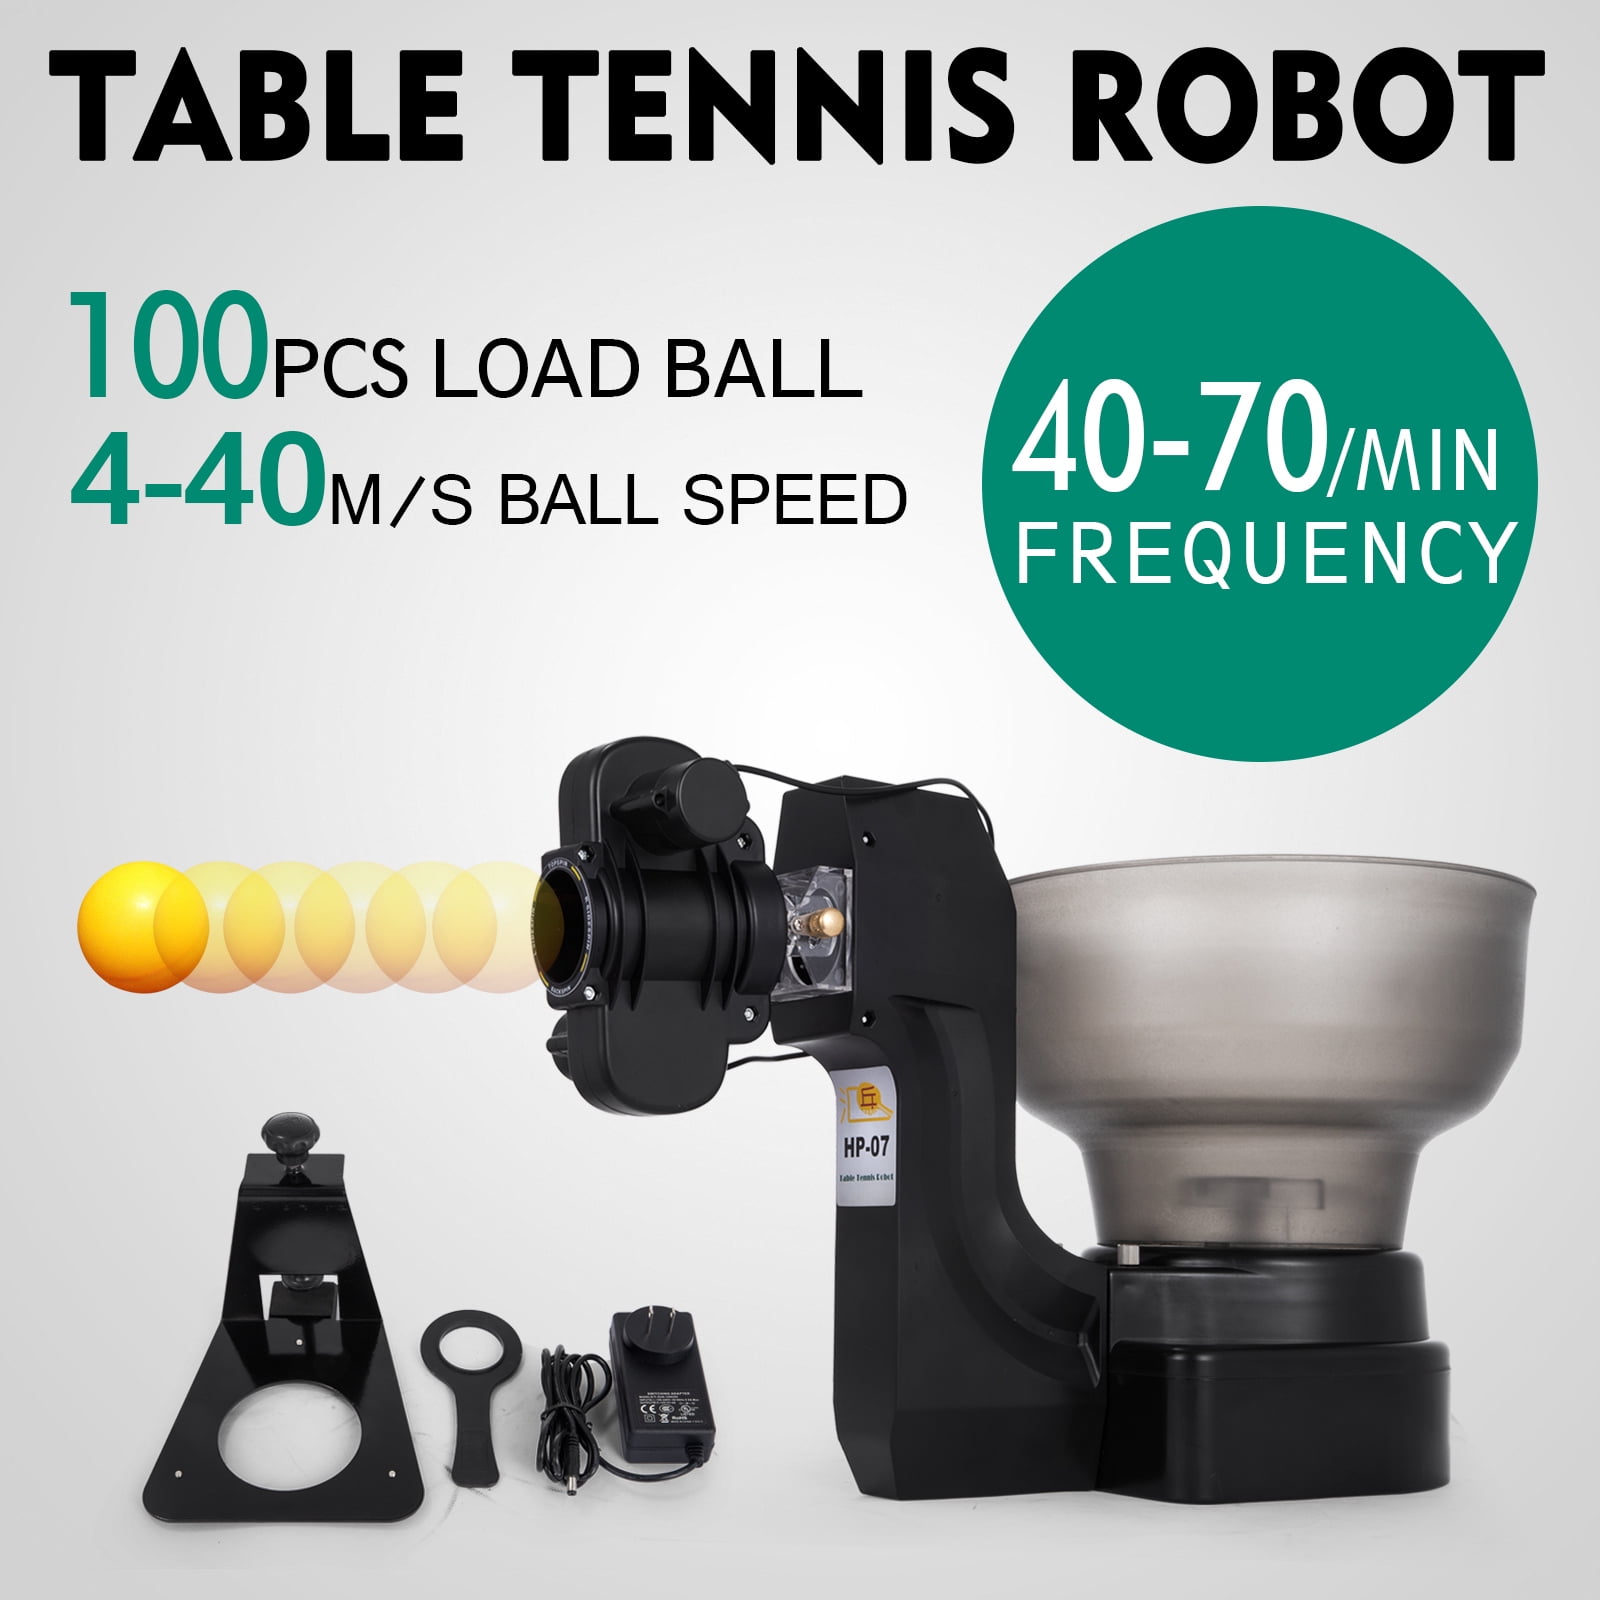 many other model available HP-07 Ping Pong Table Tennis Robot Ball Machine 